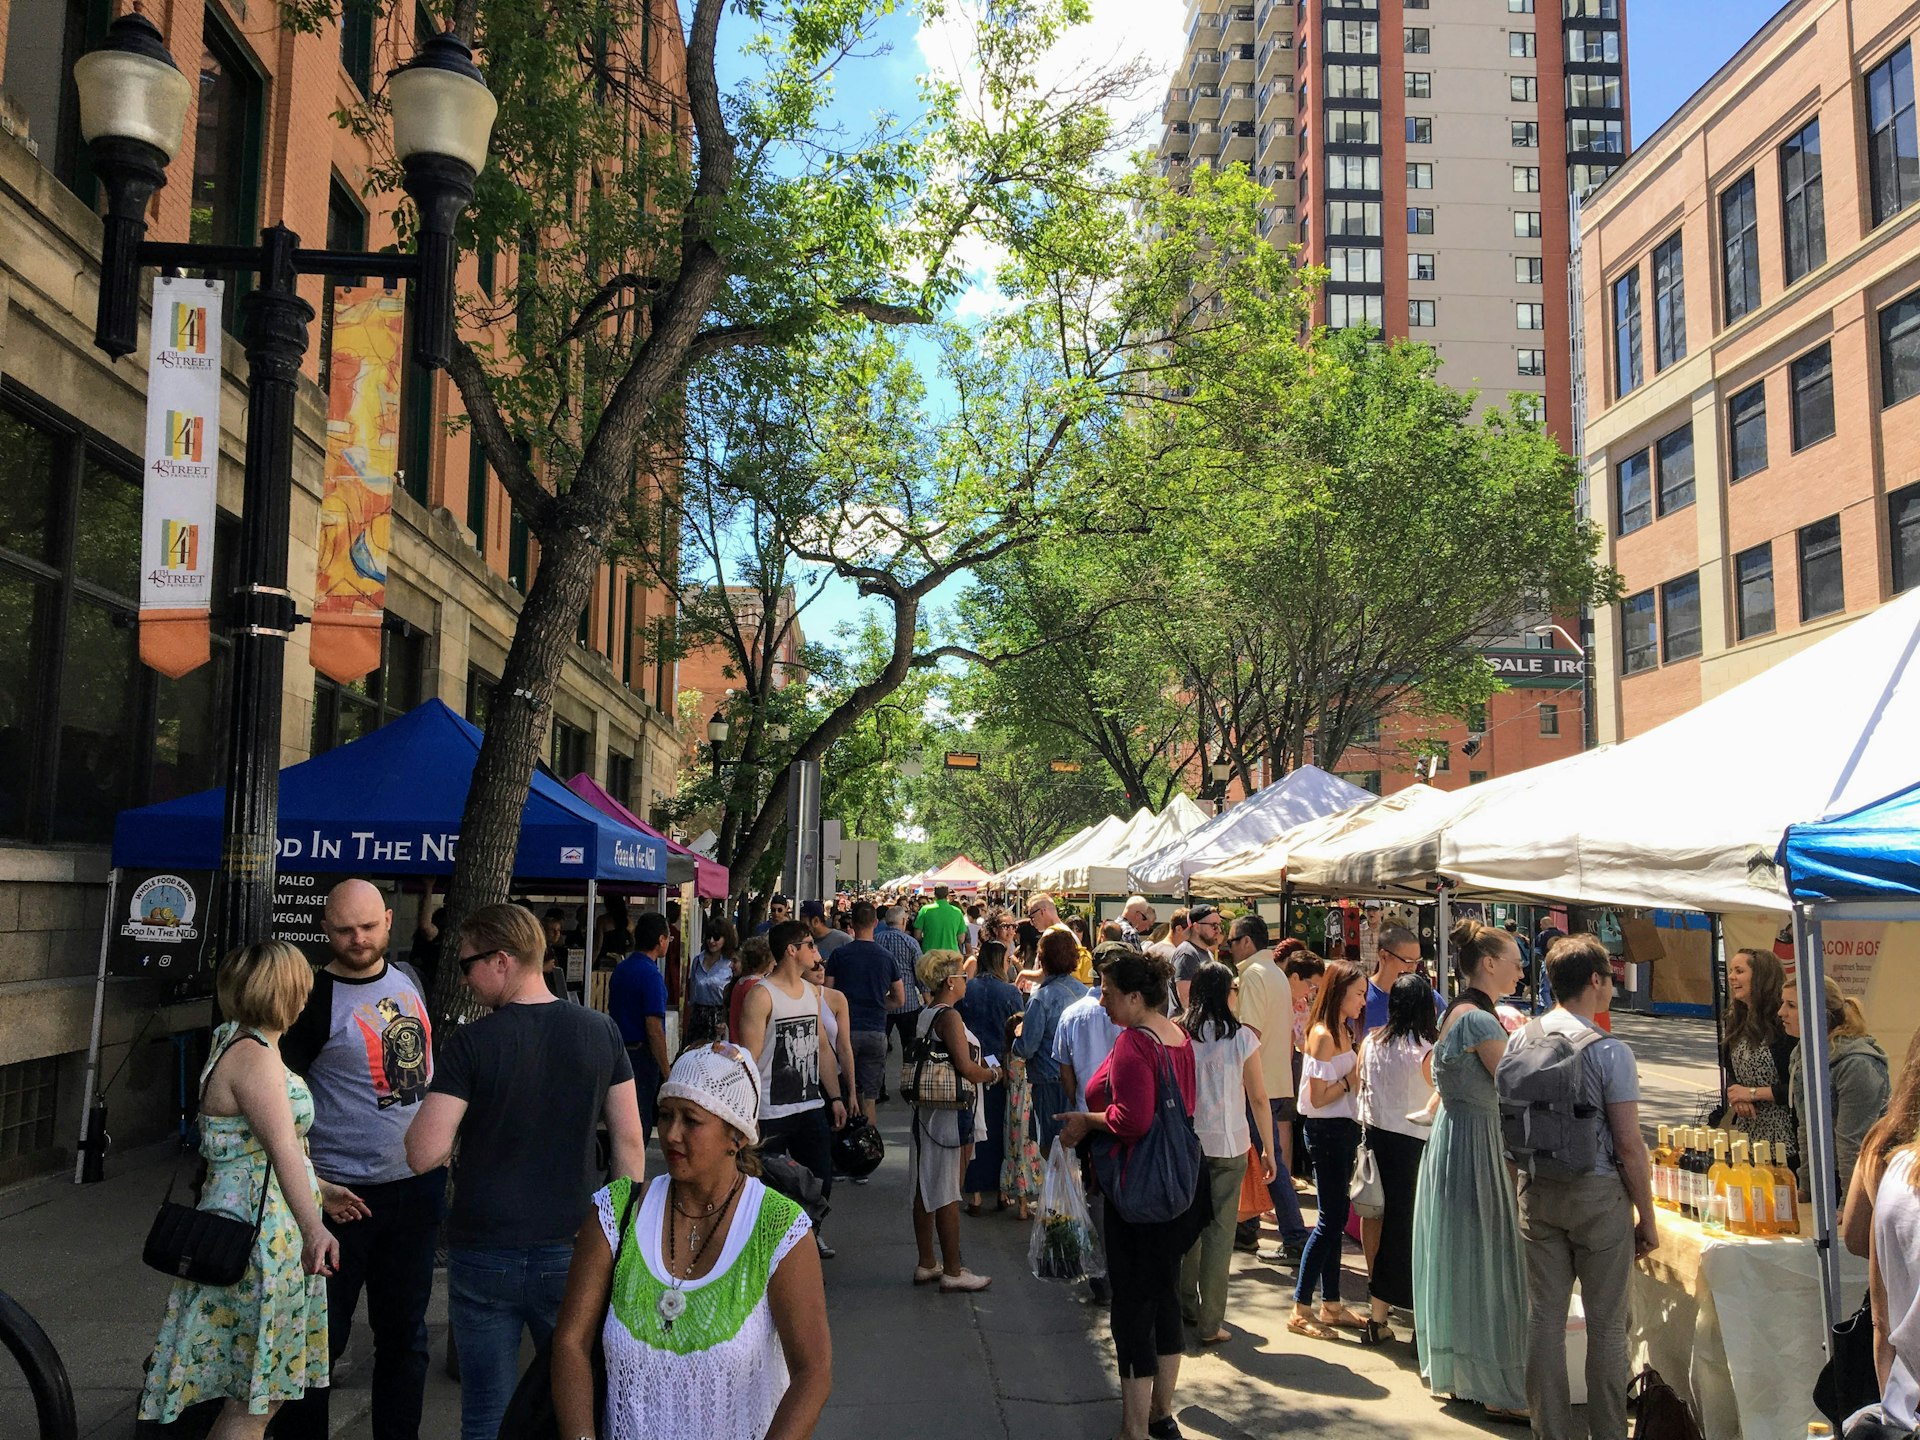 The local farmers market in downtown Edmonton, Alberta, Canada is busy with locals and tourists looking to buy fresh local food and designed clothes.